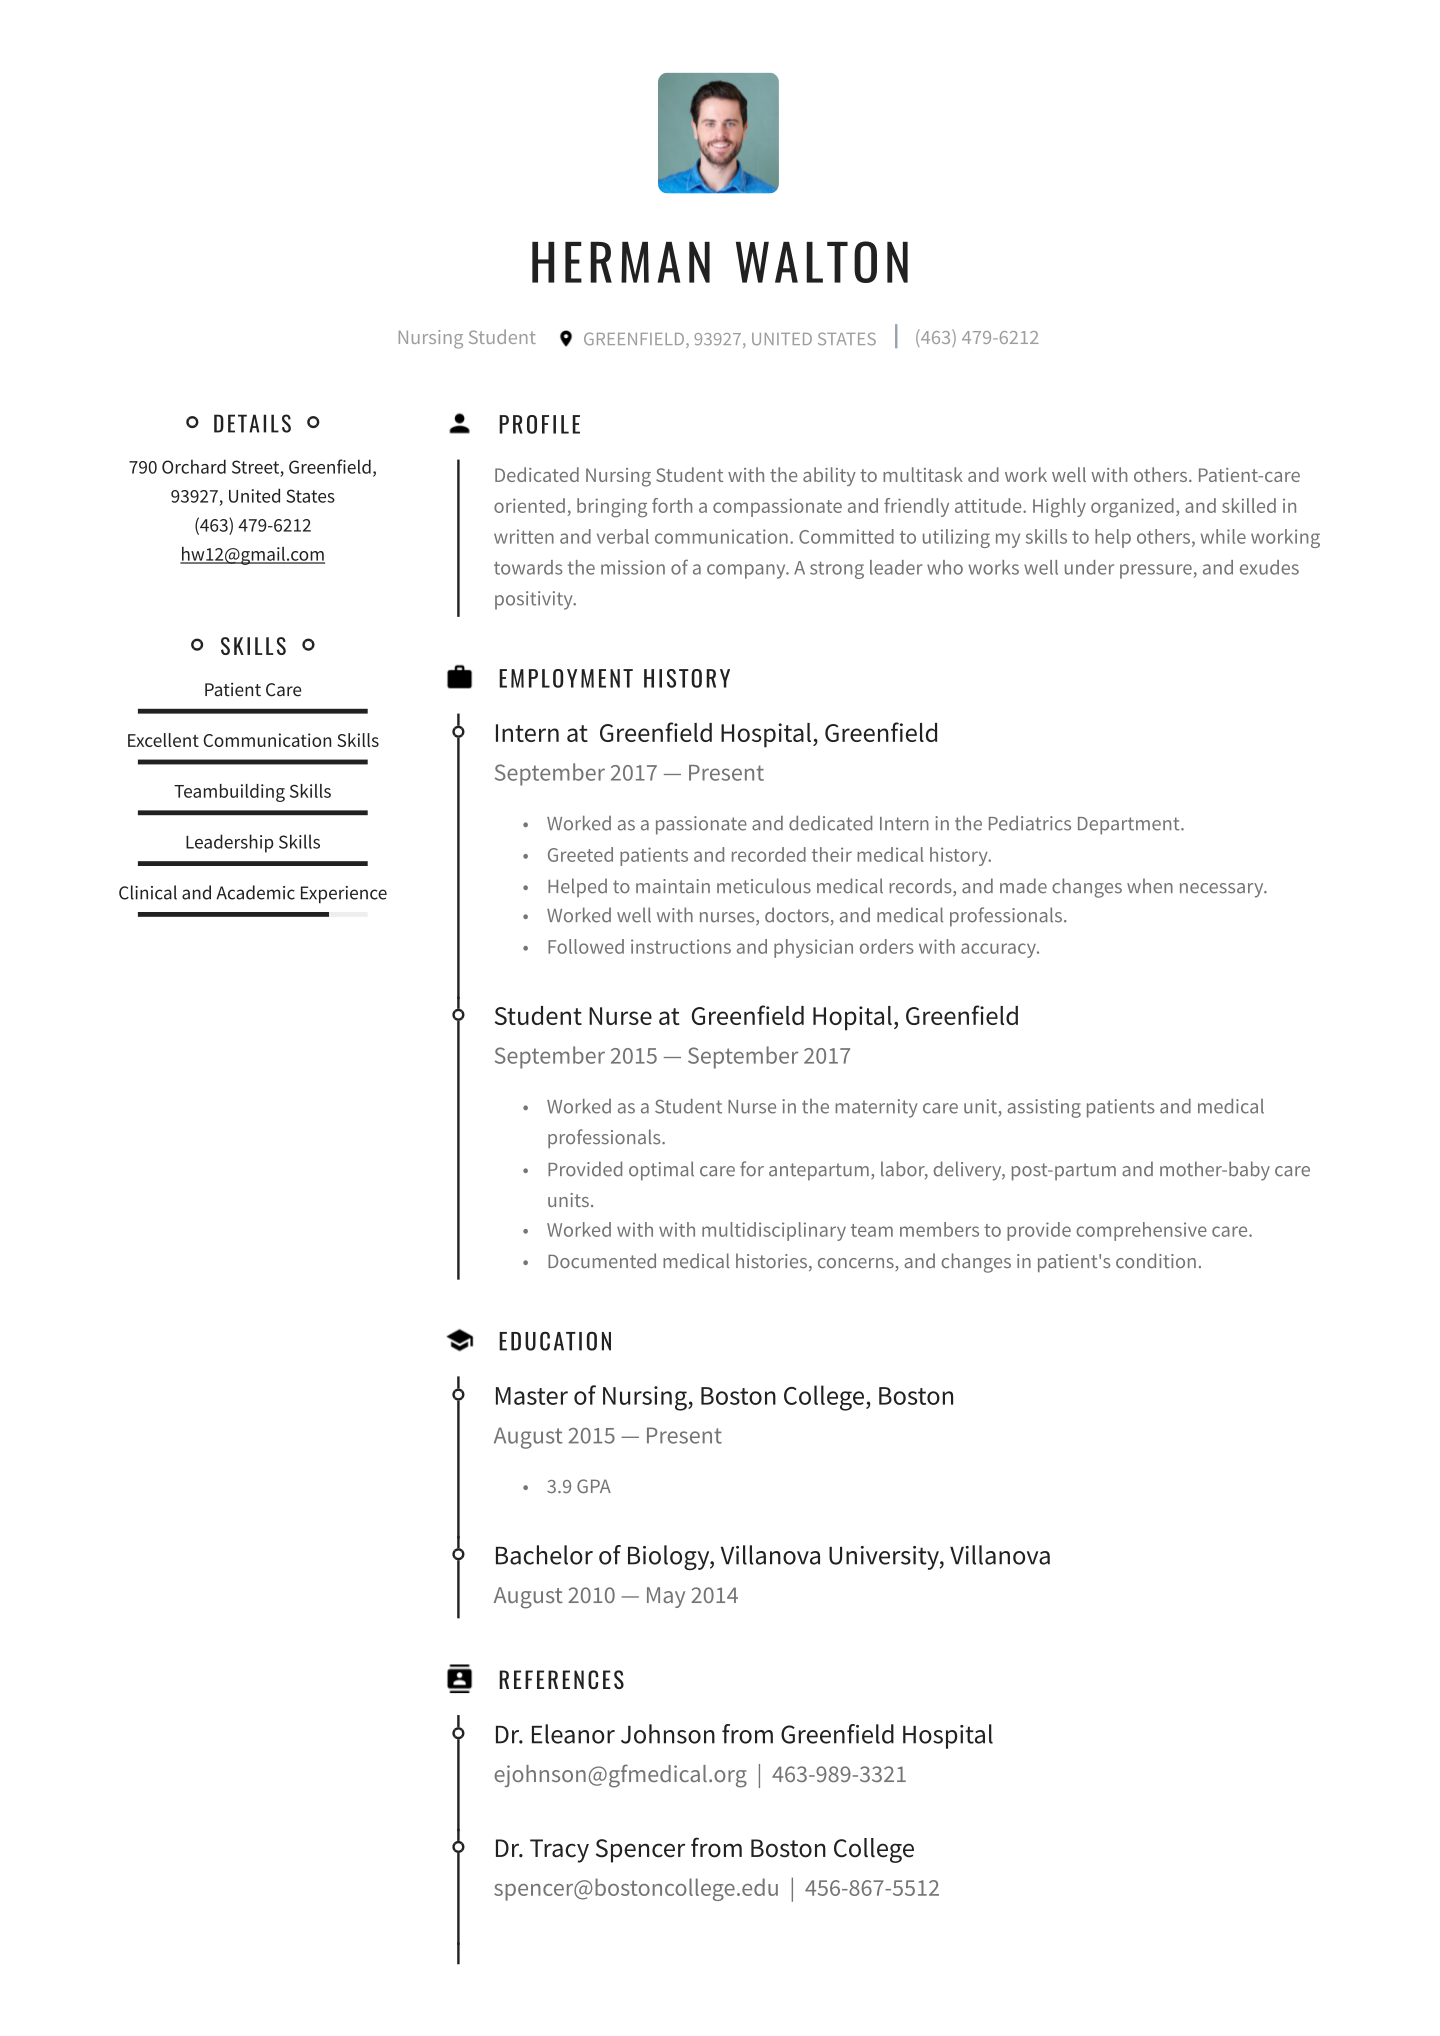 Nursing Student Resume Examples Writing Tips 2020 Free in size 1440 X 2036